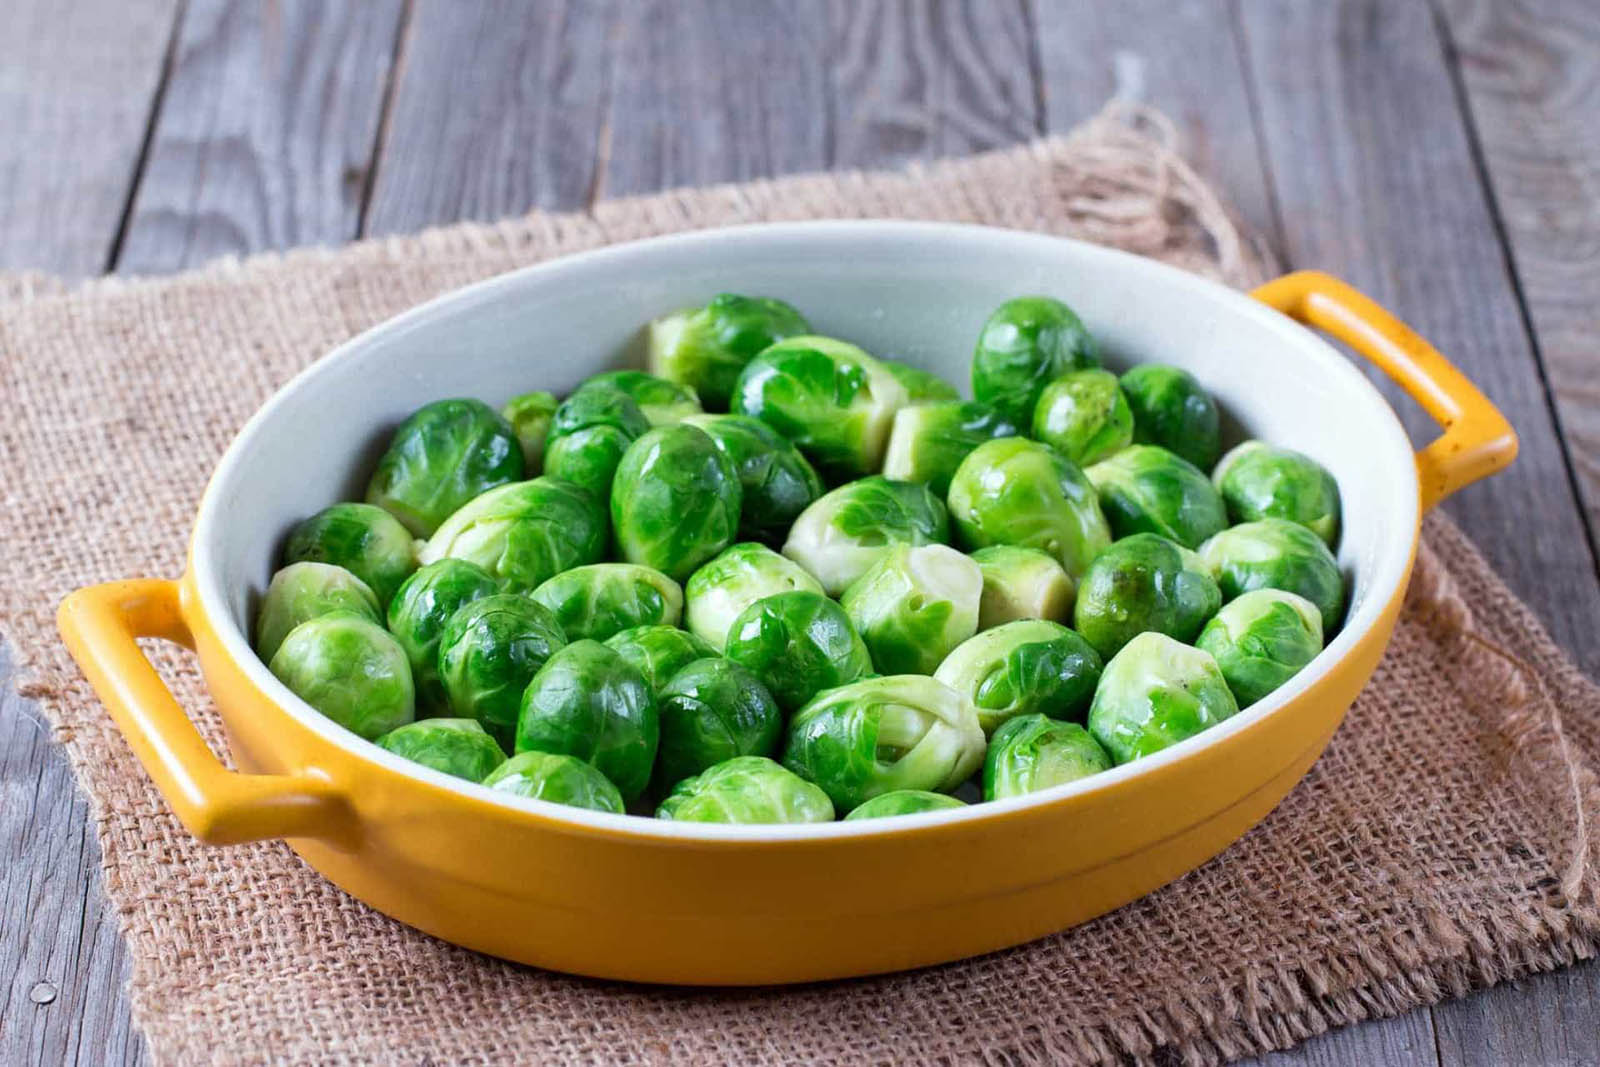 This Overrated/Underrated Food Quiz Will Reveal Your Exact Age Brussels sprouts